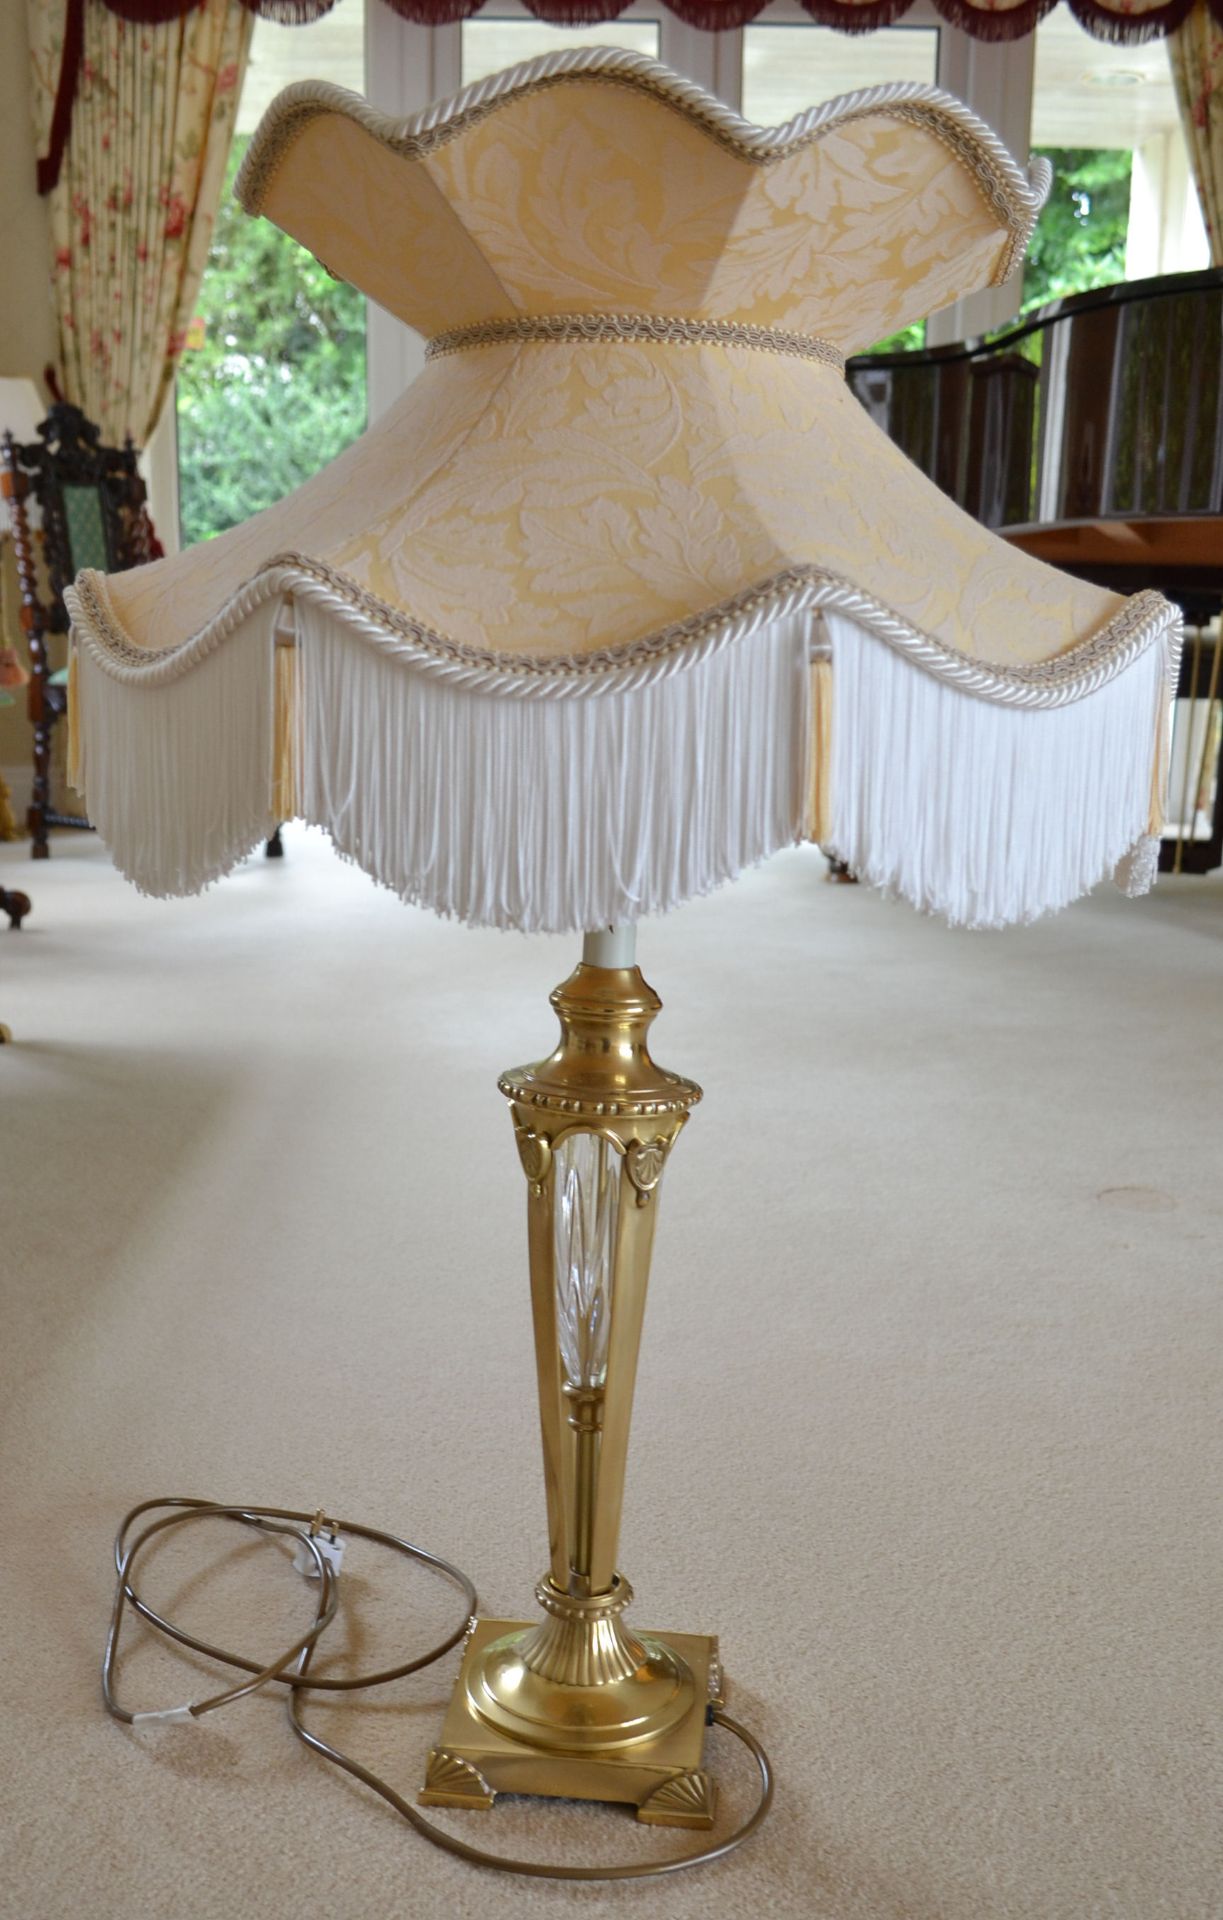 1 x Art Deco Style Lamp in Gold - CL226 - Location: Knutsford WA16 - NO VAT ON THE HAMMER Includes